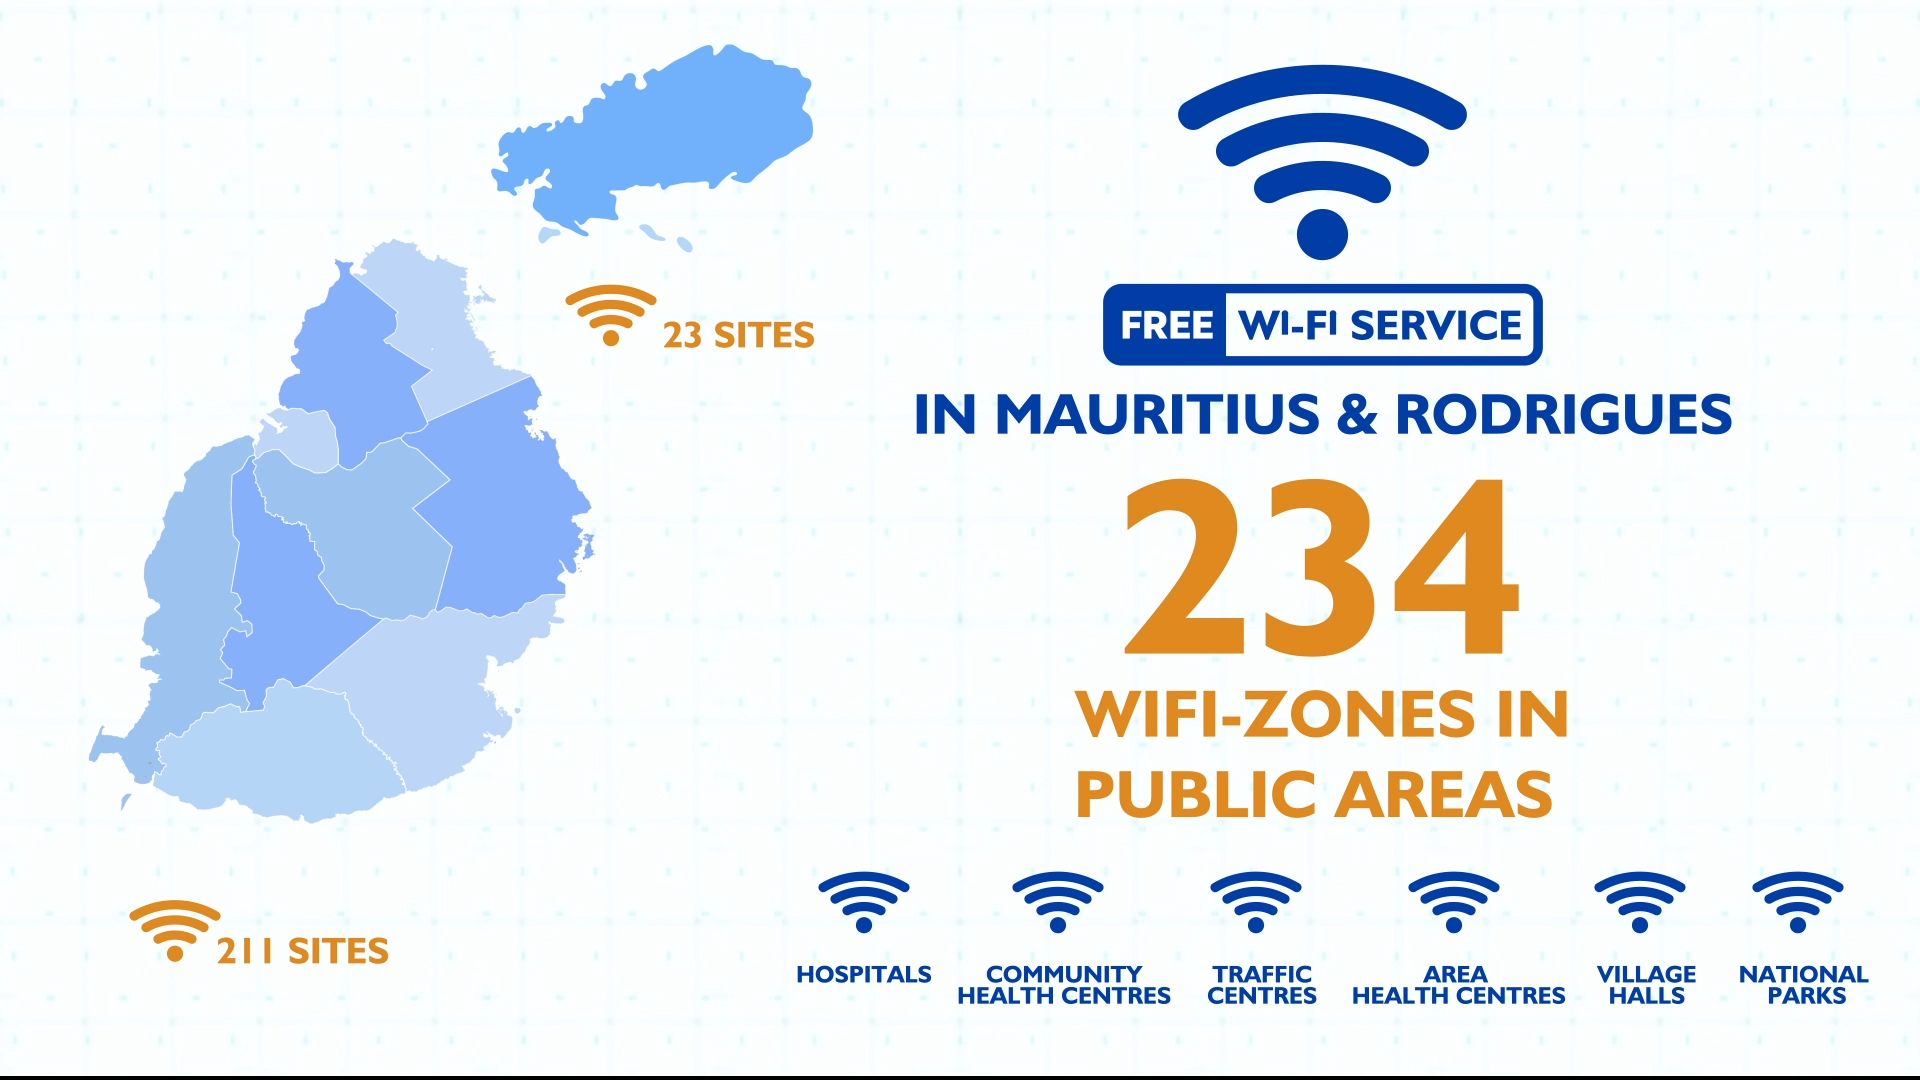 Launching of Free Wi-Fi Zones by ICTA funded under USF - 27 May 2022